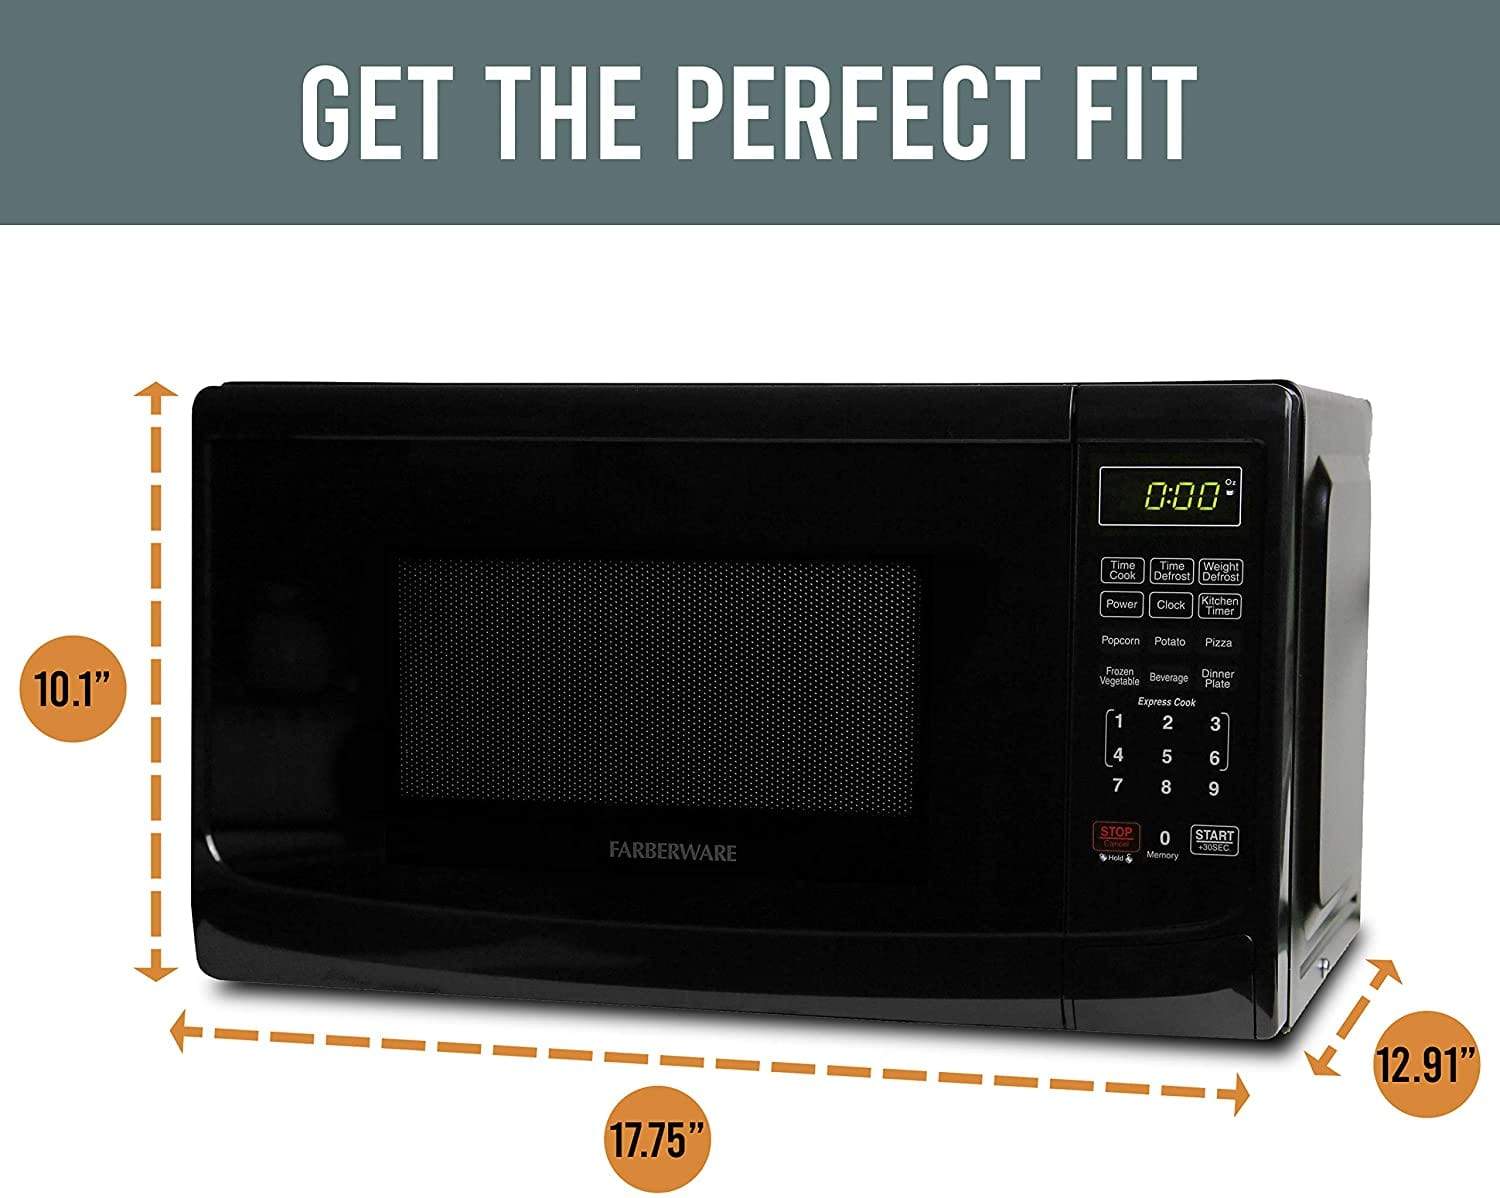 Farberware Household Microwave Oven Classic